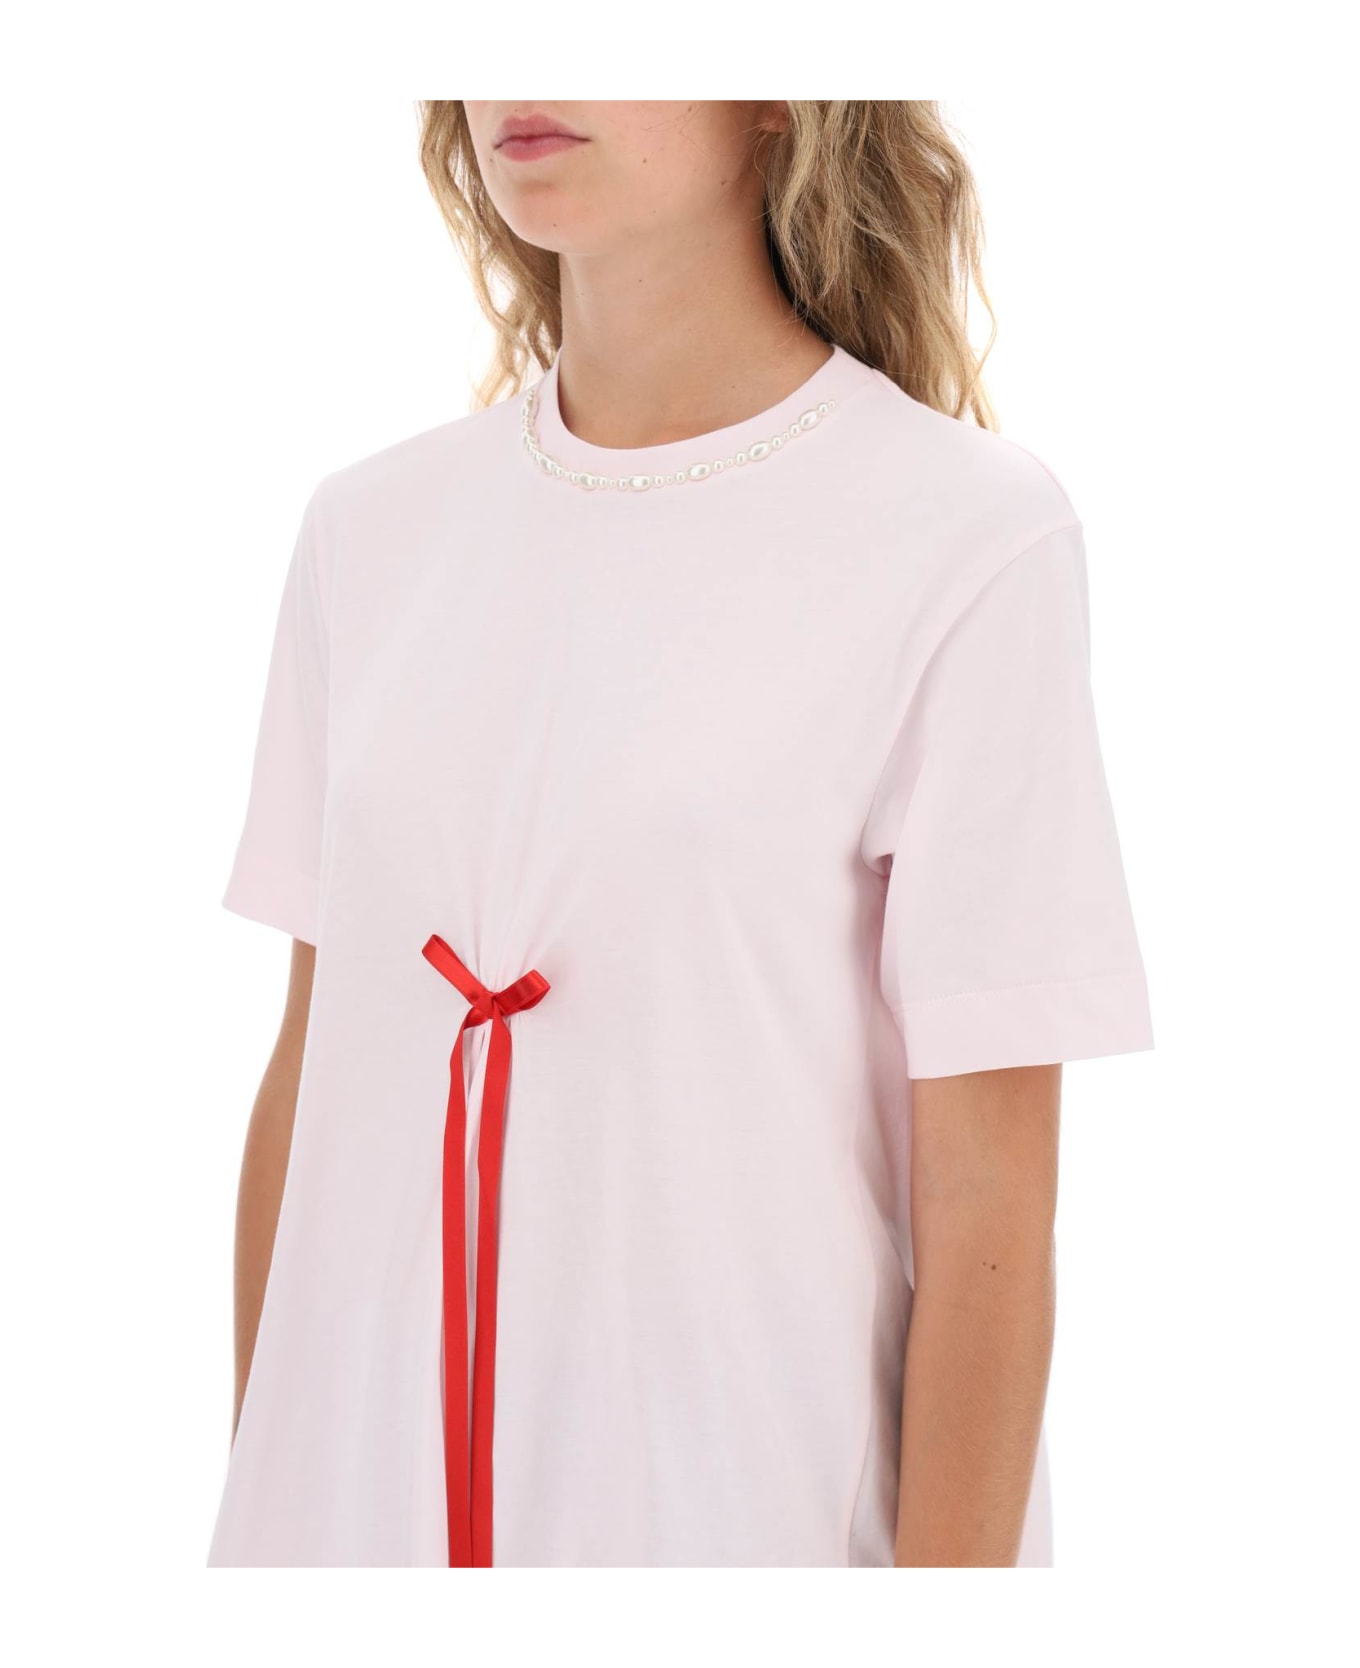 Simone Rocha A-line T-shirt With Bow Detail - PINK RED PEARL (Pink) ポロシャツ